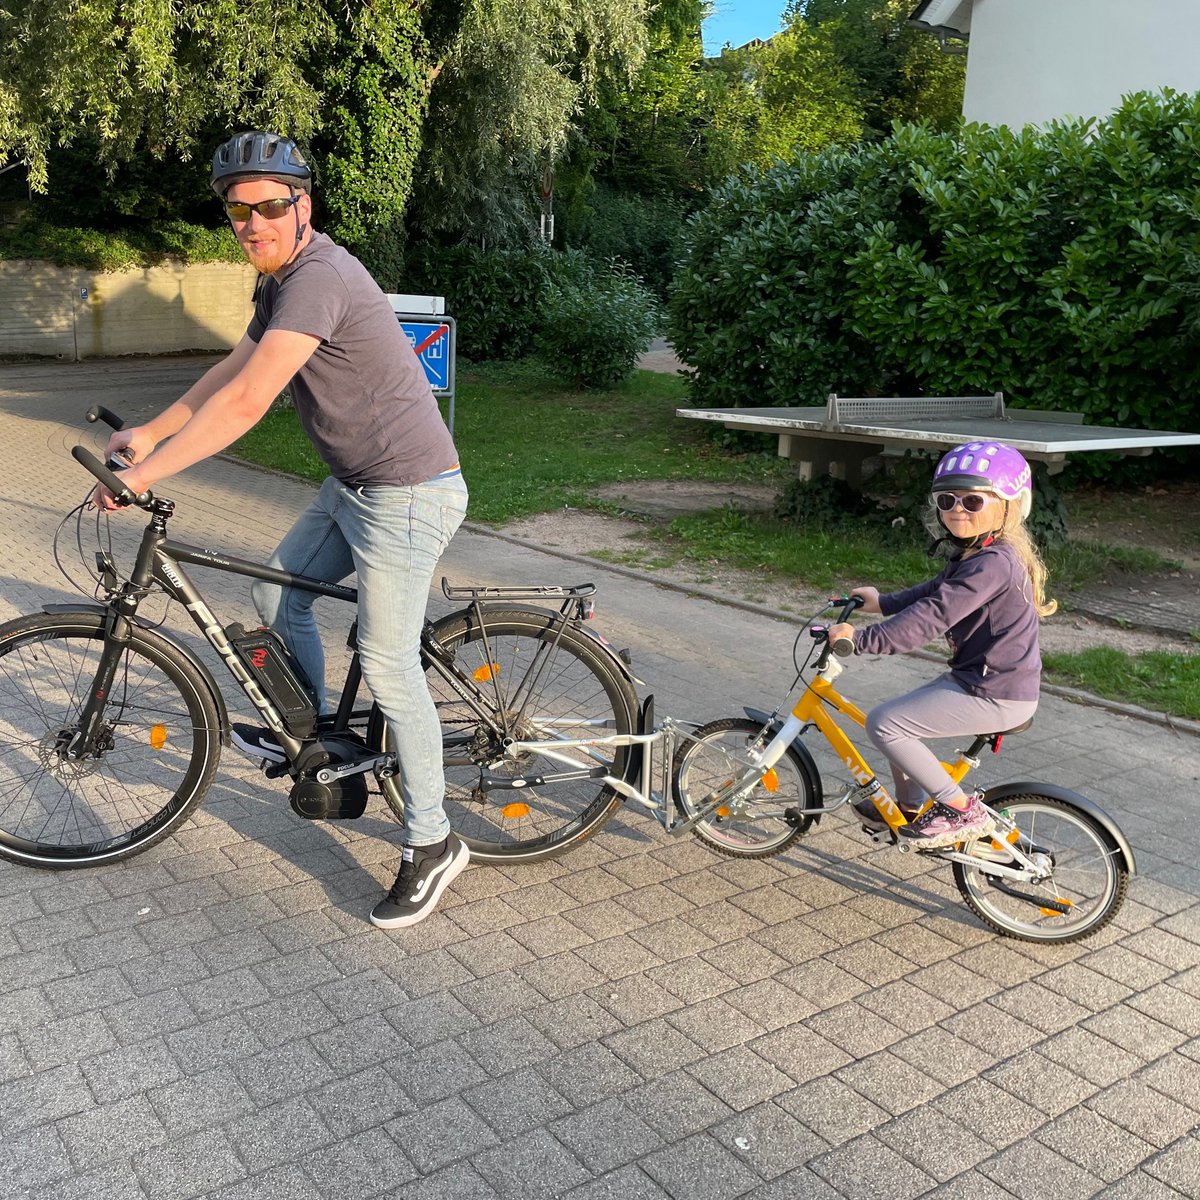 Tandemstange am Fahrrad: Unsere 5 Learnings